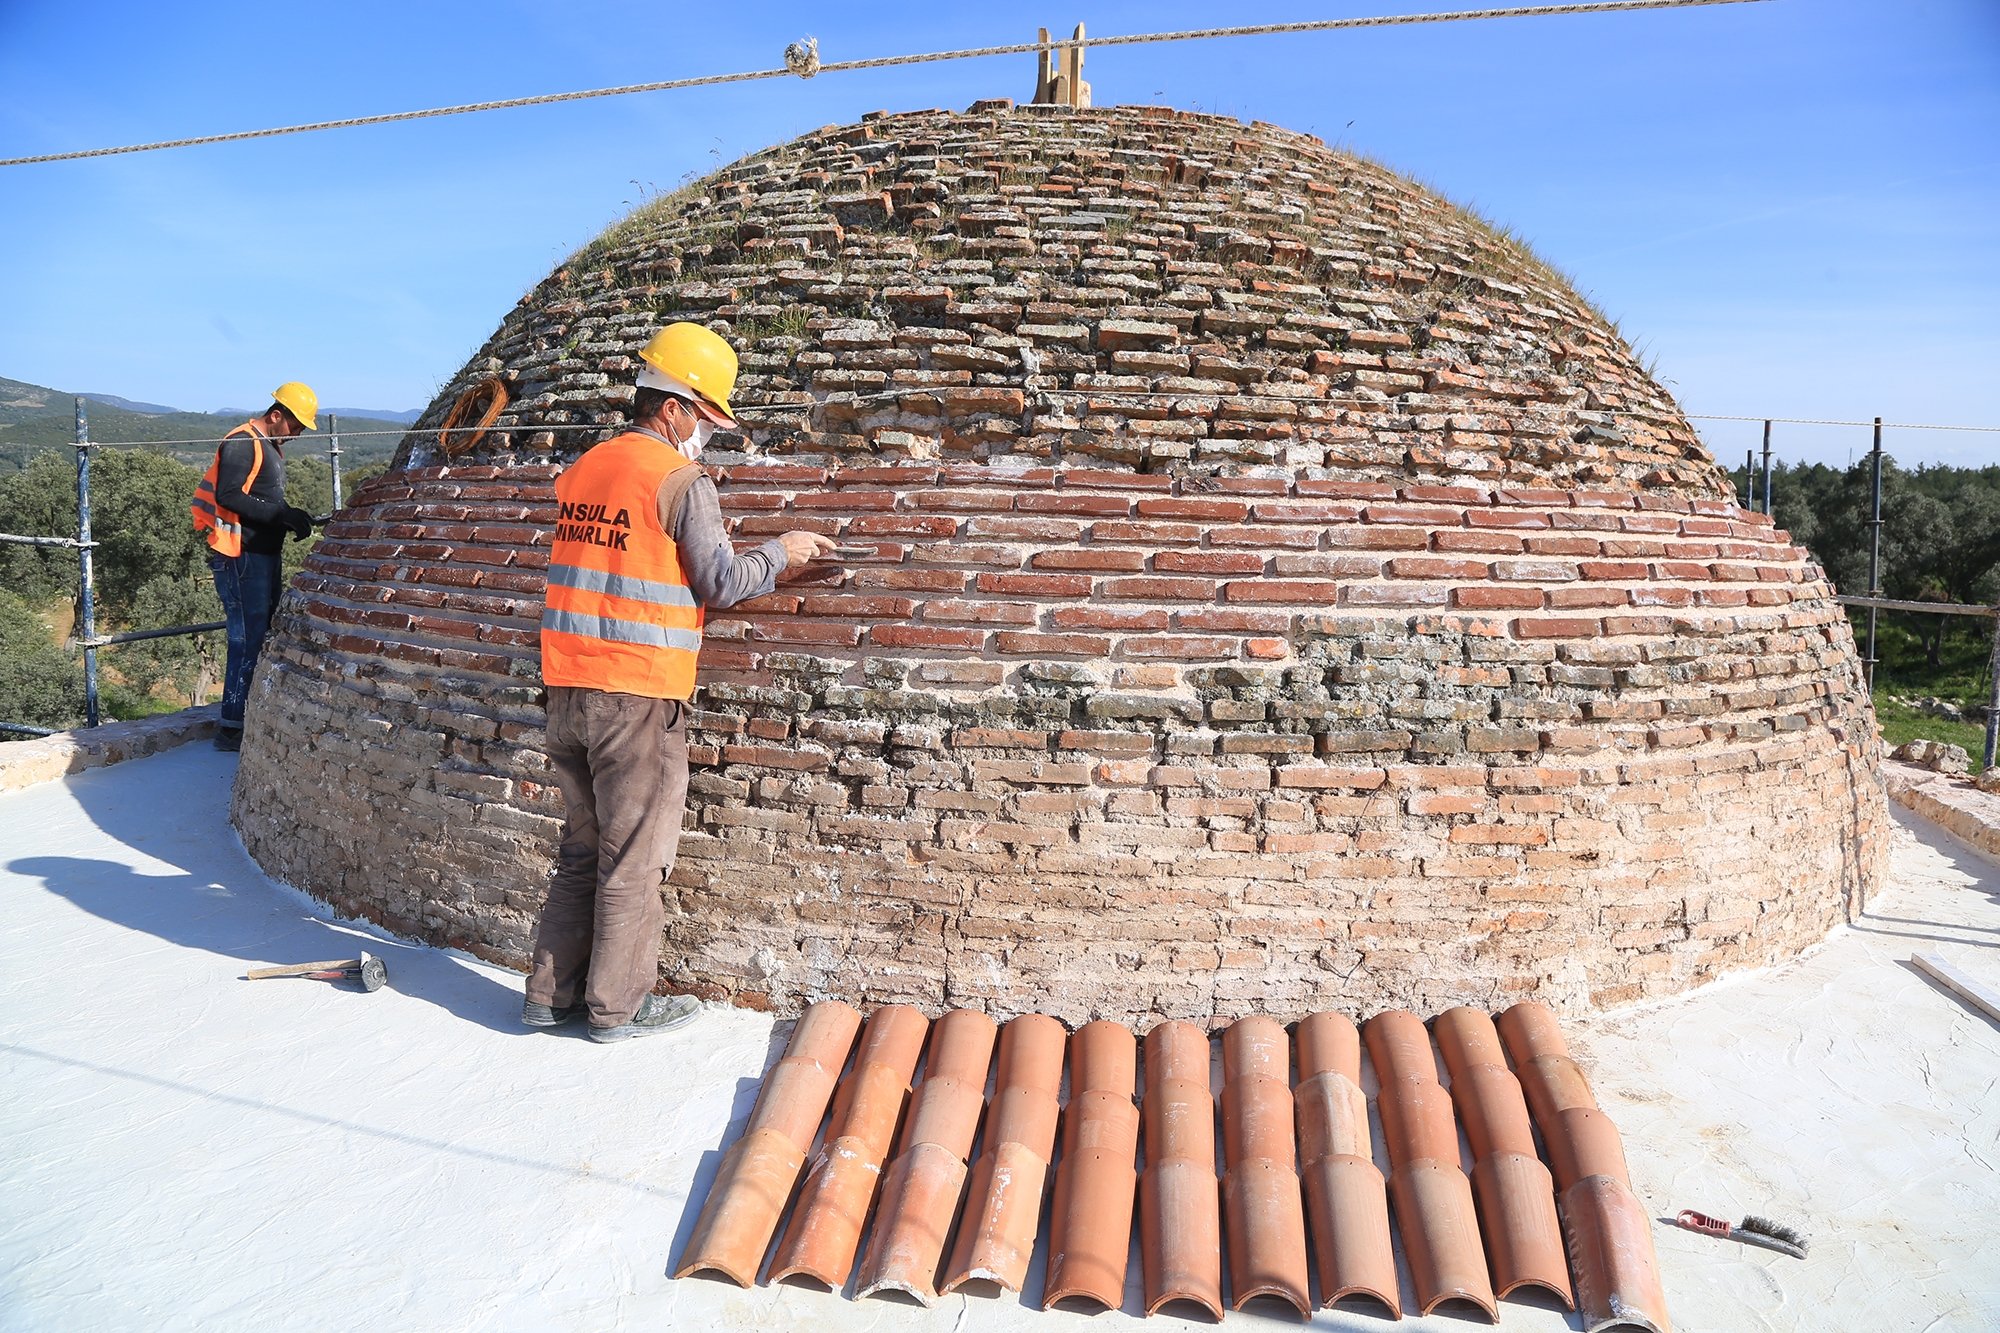 Restorers work on the dome of the Yelli mosque in the ancient city of Beçin, Muğla, southwestern Turkey, April 20, 2021. (AA Photo) 